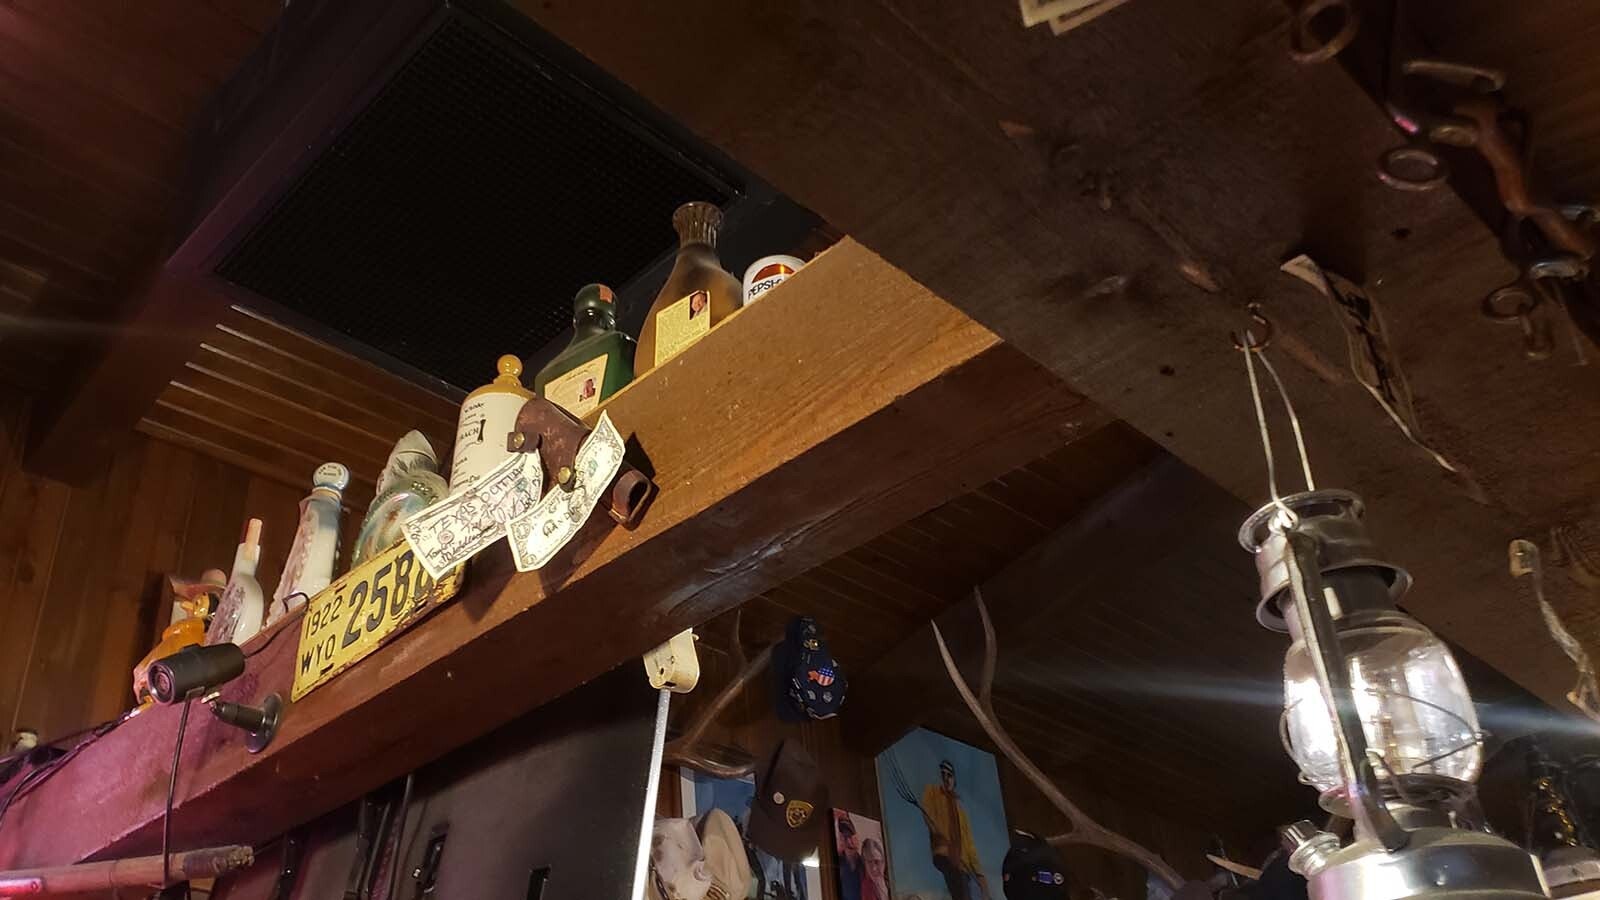 There's so much memorabilia it fills every nook and cranny at the Bunkhouse.